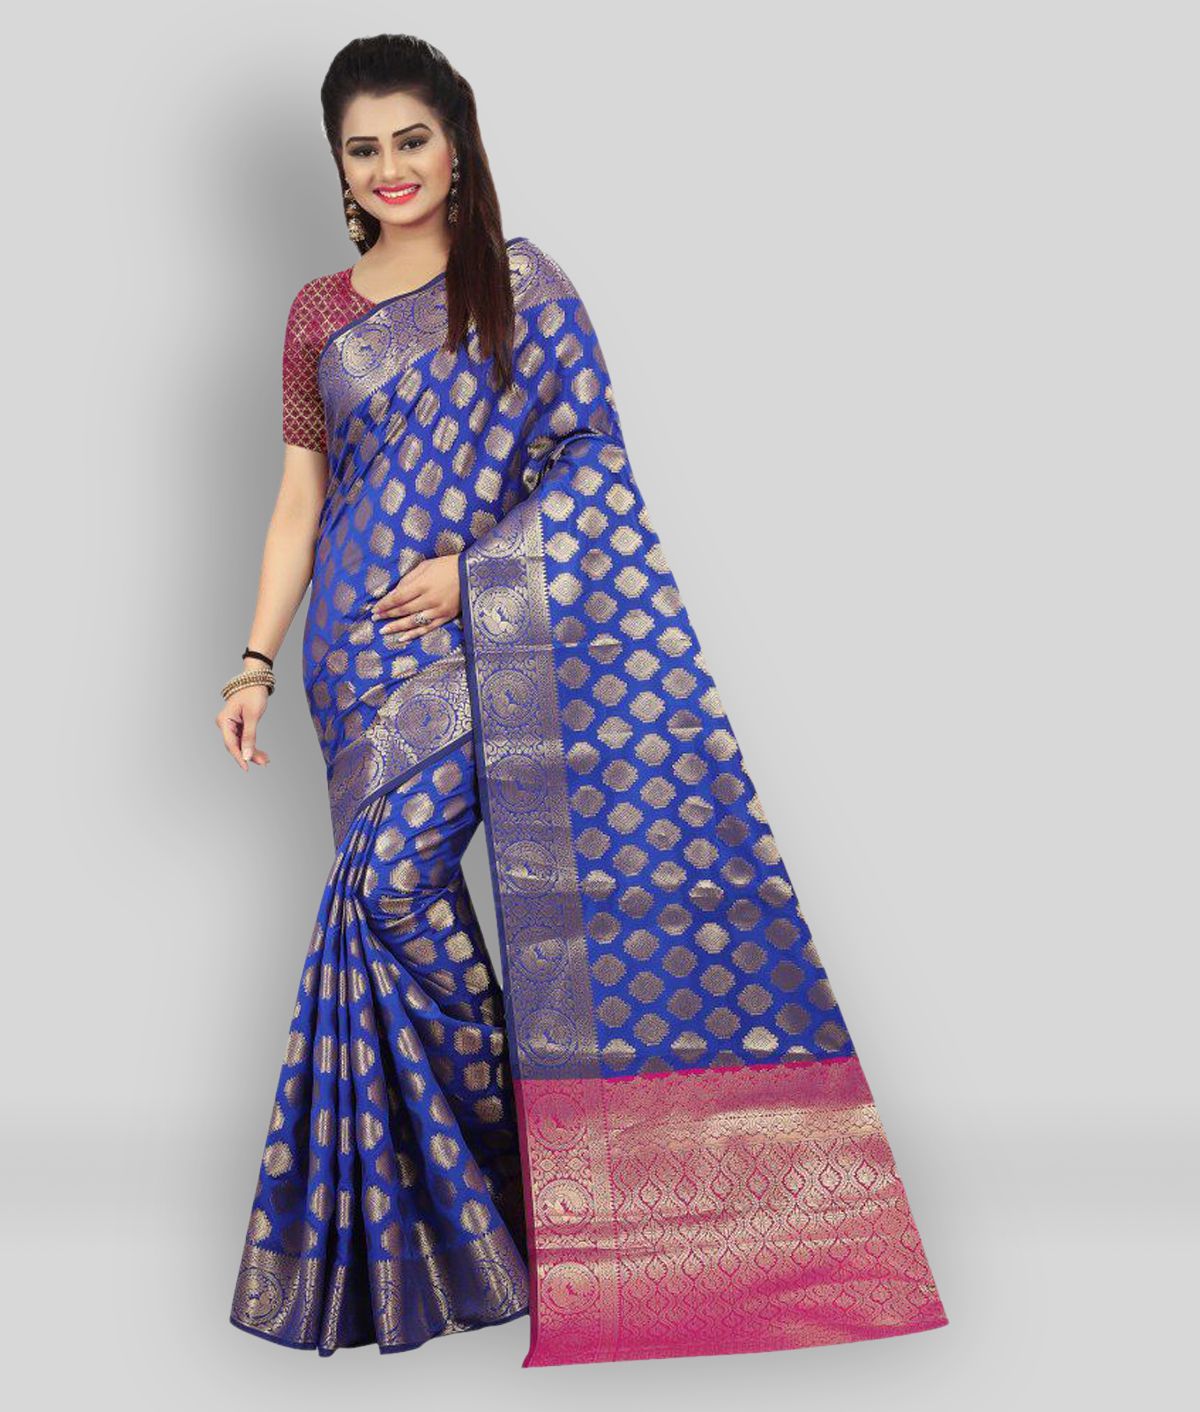 Gazal Fashions - Multicolor Silk Saree With Blouse Piece ( Pack of 1 )